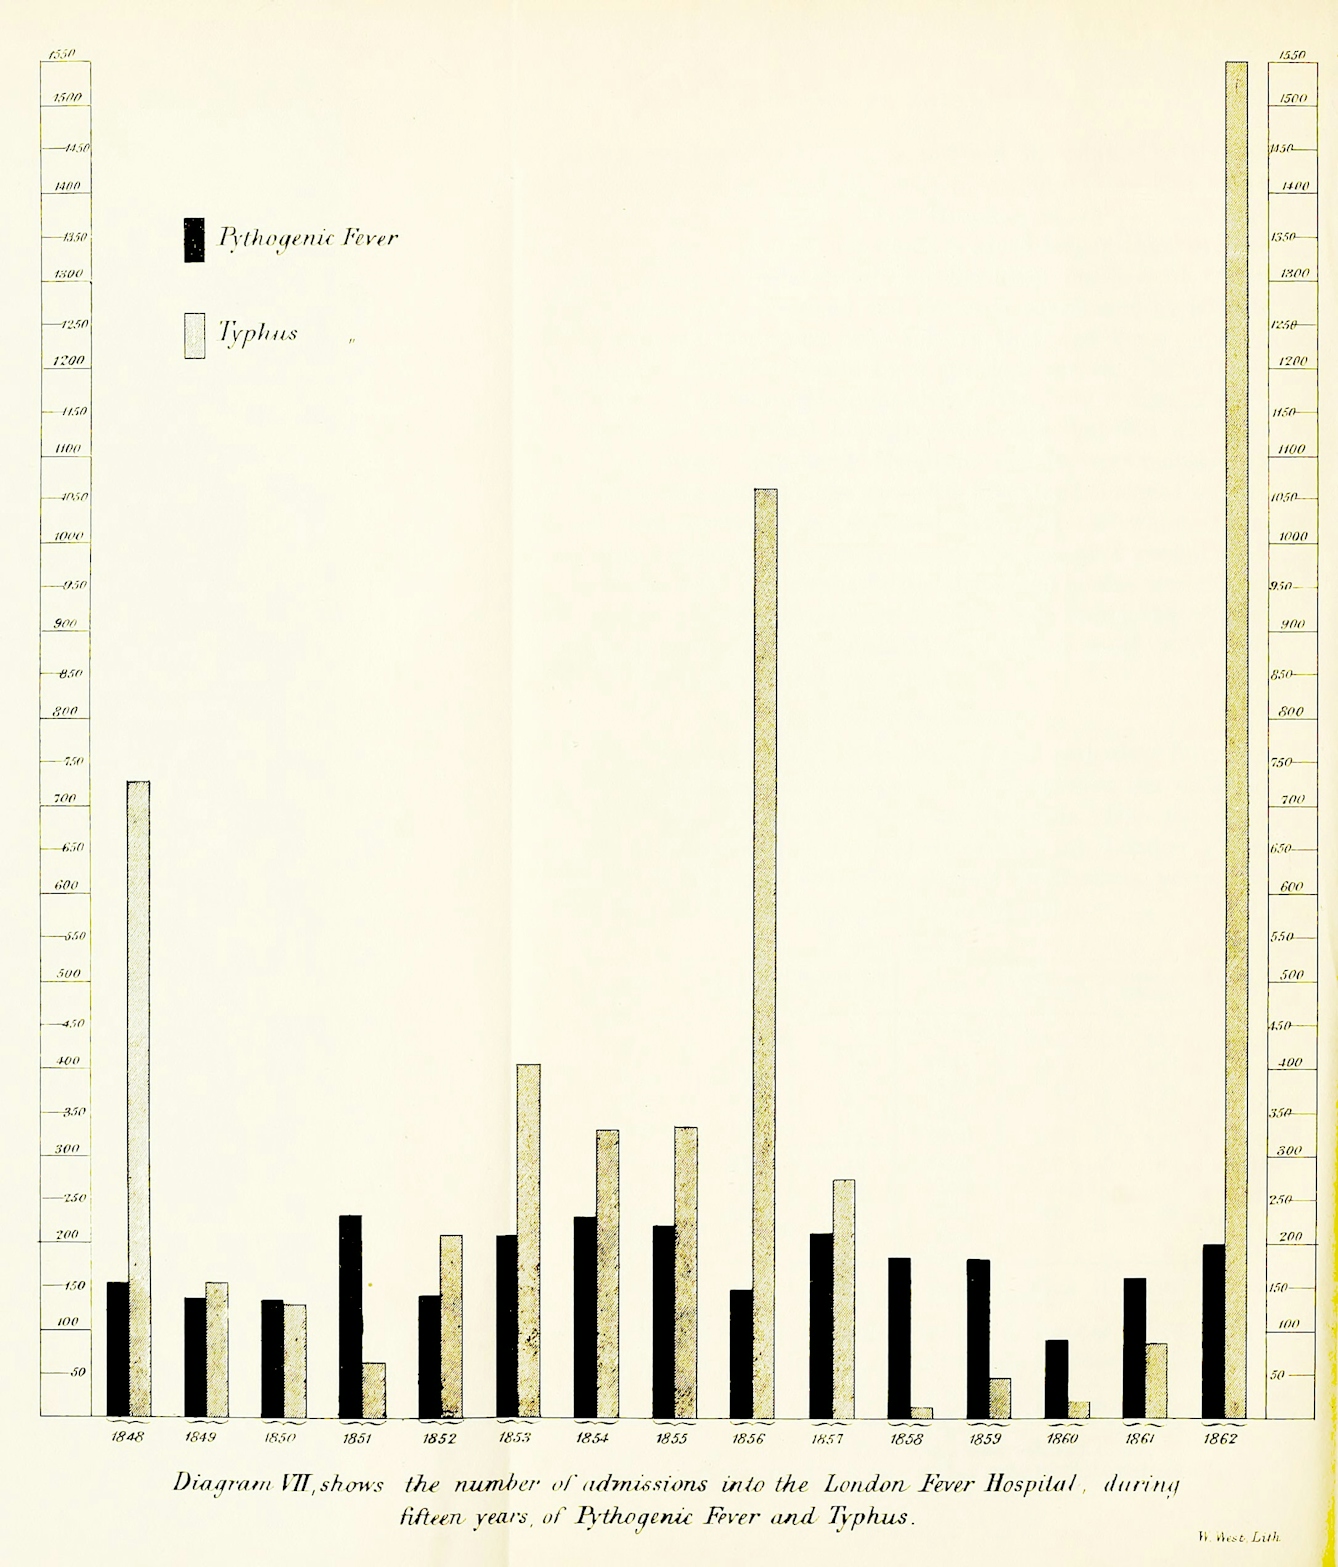 A bar chart showing admissions to the London Fever Hospital over 15 years for Typhus and Typhoid. There are three large spikes fo typus at roughly five year intervals, whereas typhoid incidents of typhoid remain roughly the same over the time period. This suggests that typhus is epidemic, coming in waves but typhoid is endemic, always present in the population and environment.